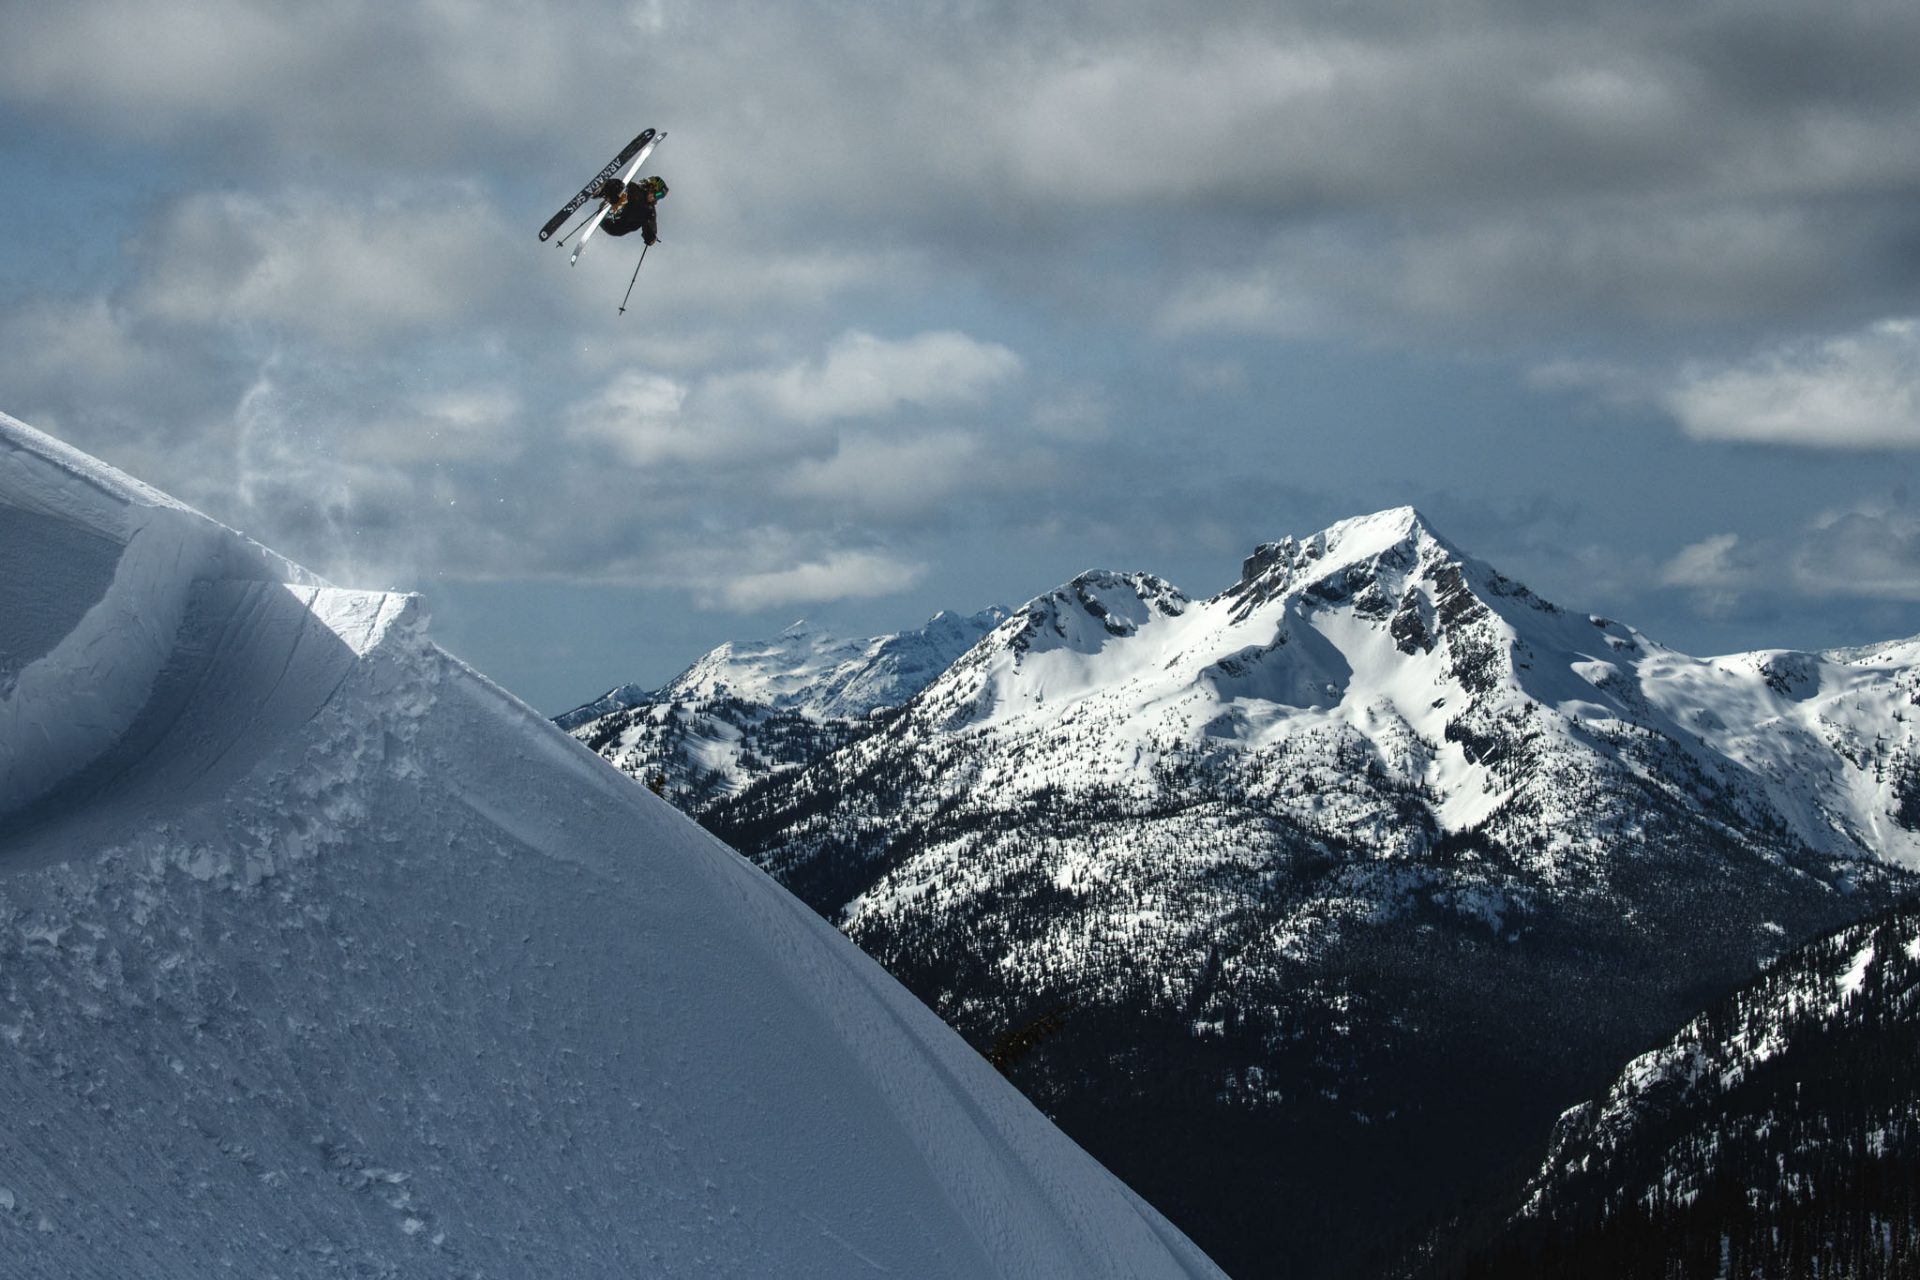 Sammy Carlson boosting a backcountry hit while filming for North of Now.